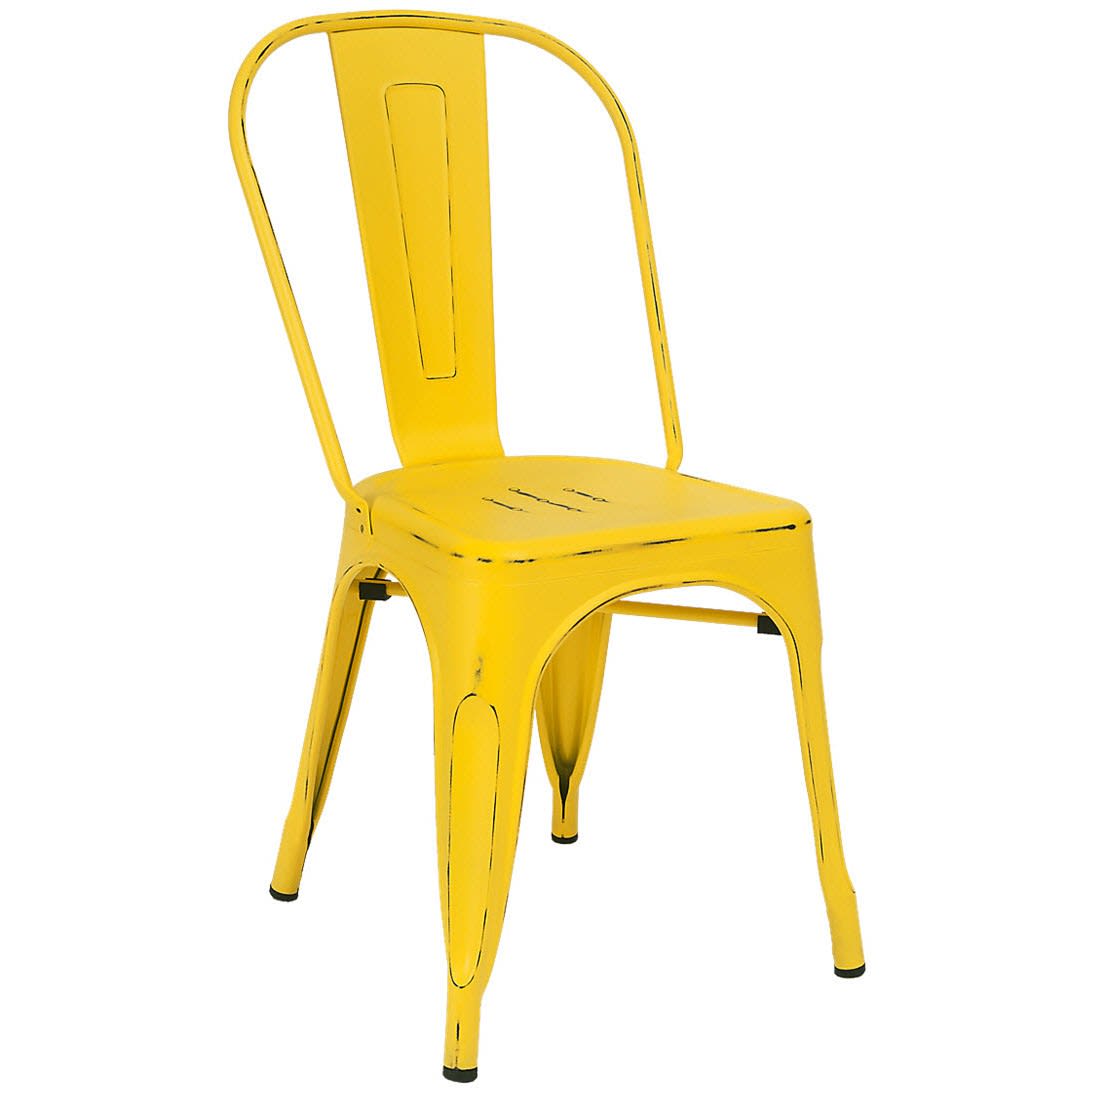 Bistro Style Metal Chair in Distressed Yellow Finish